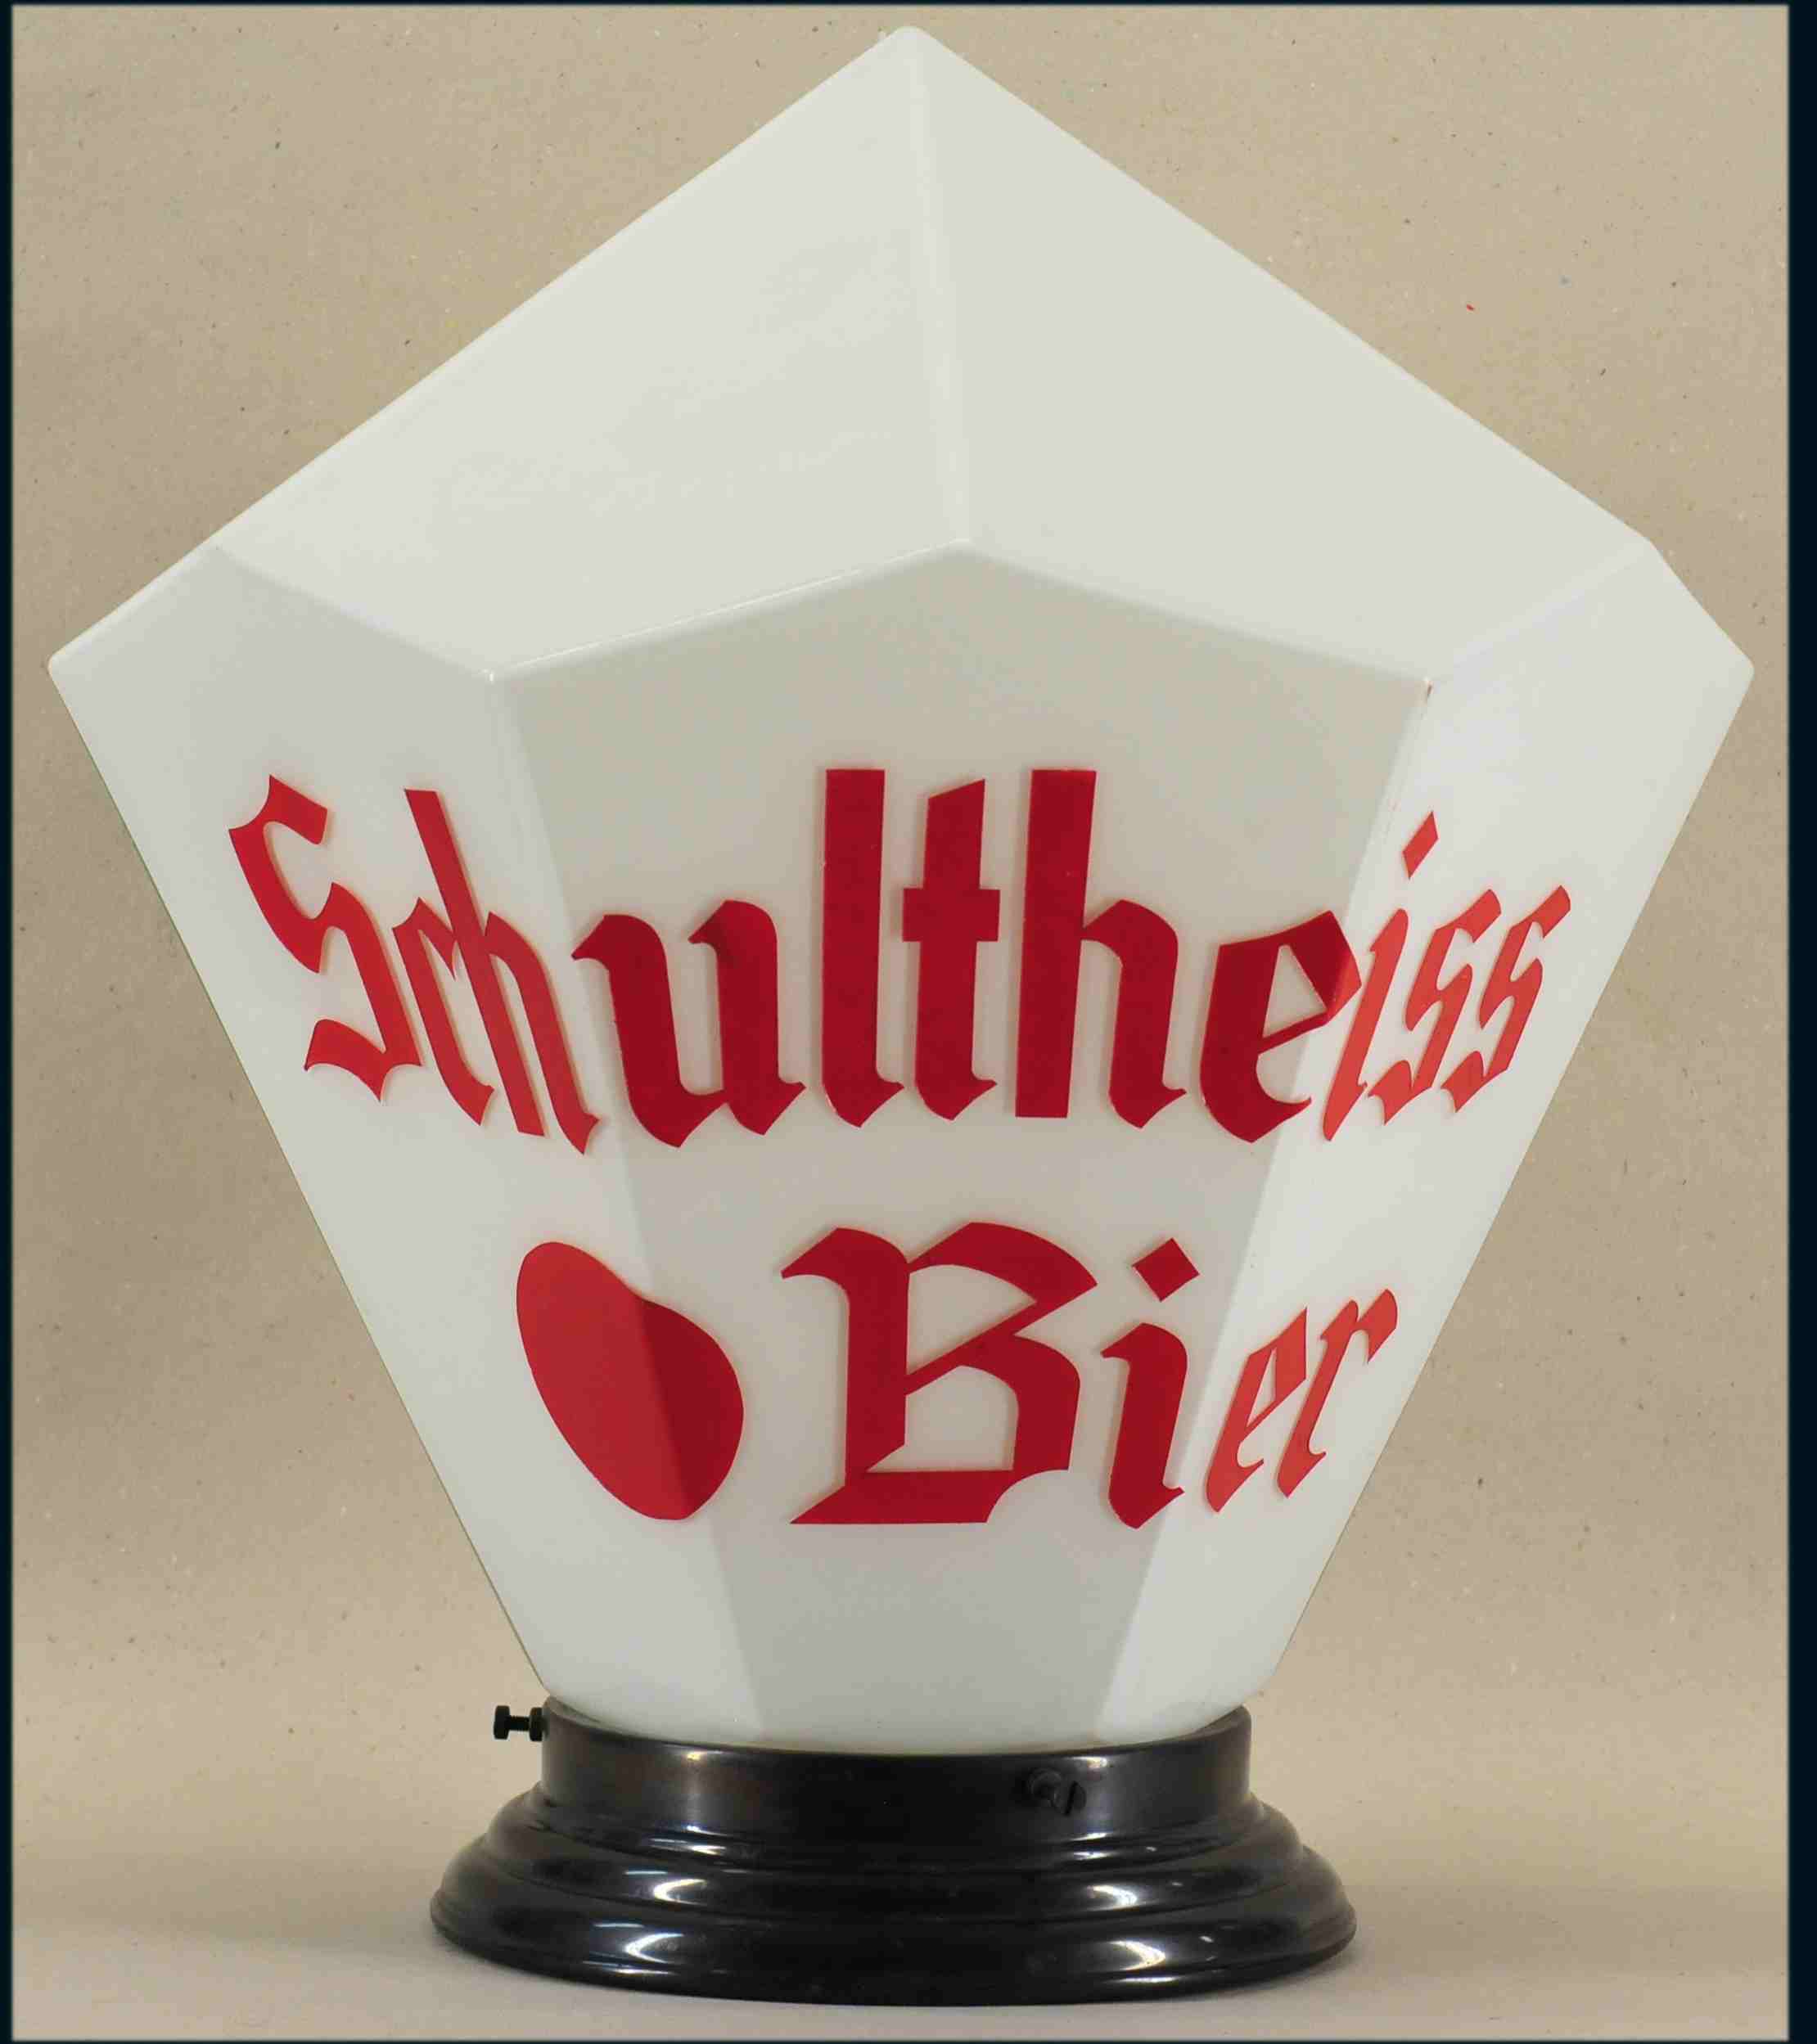 Schultheiss Bier Lampe 